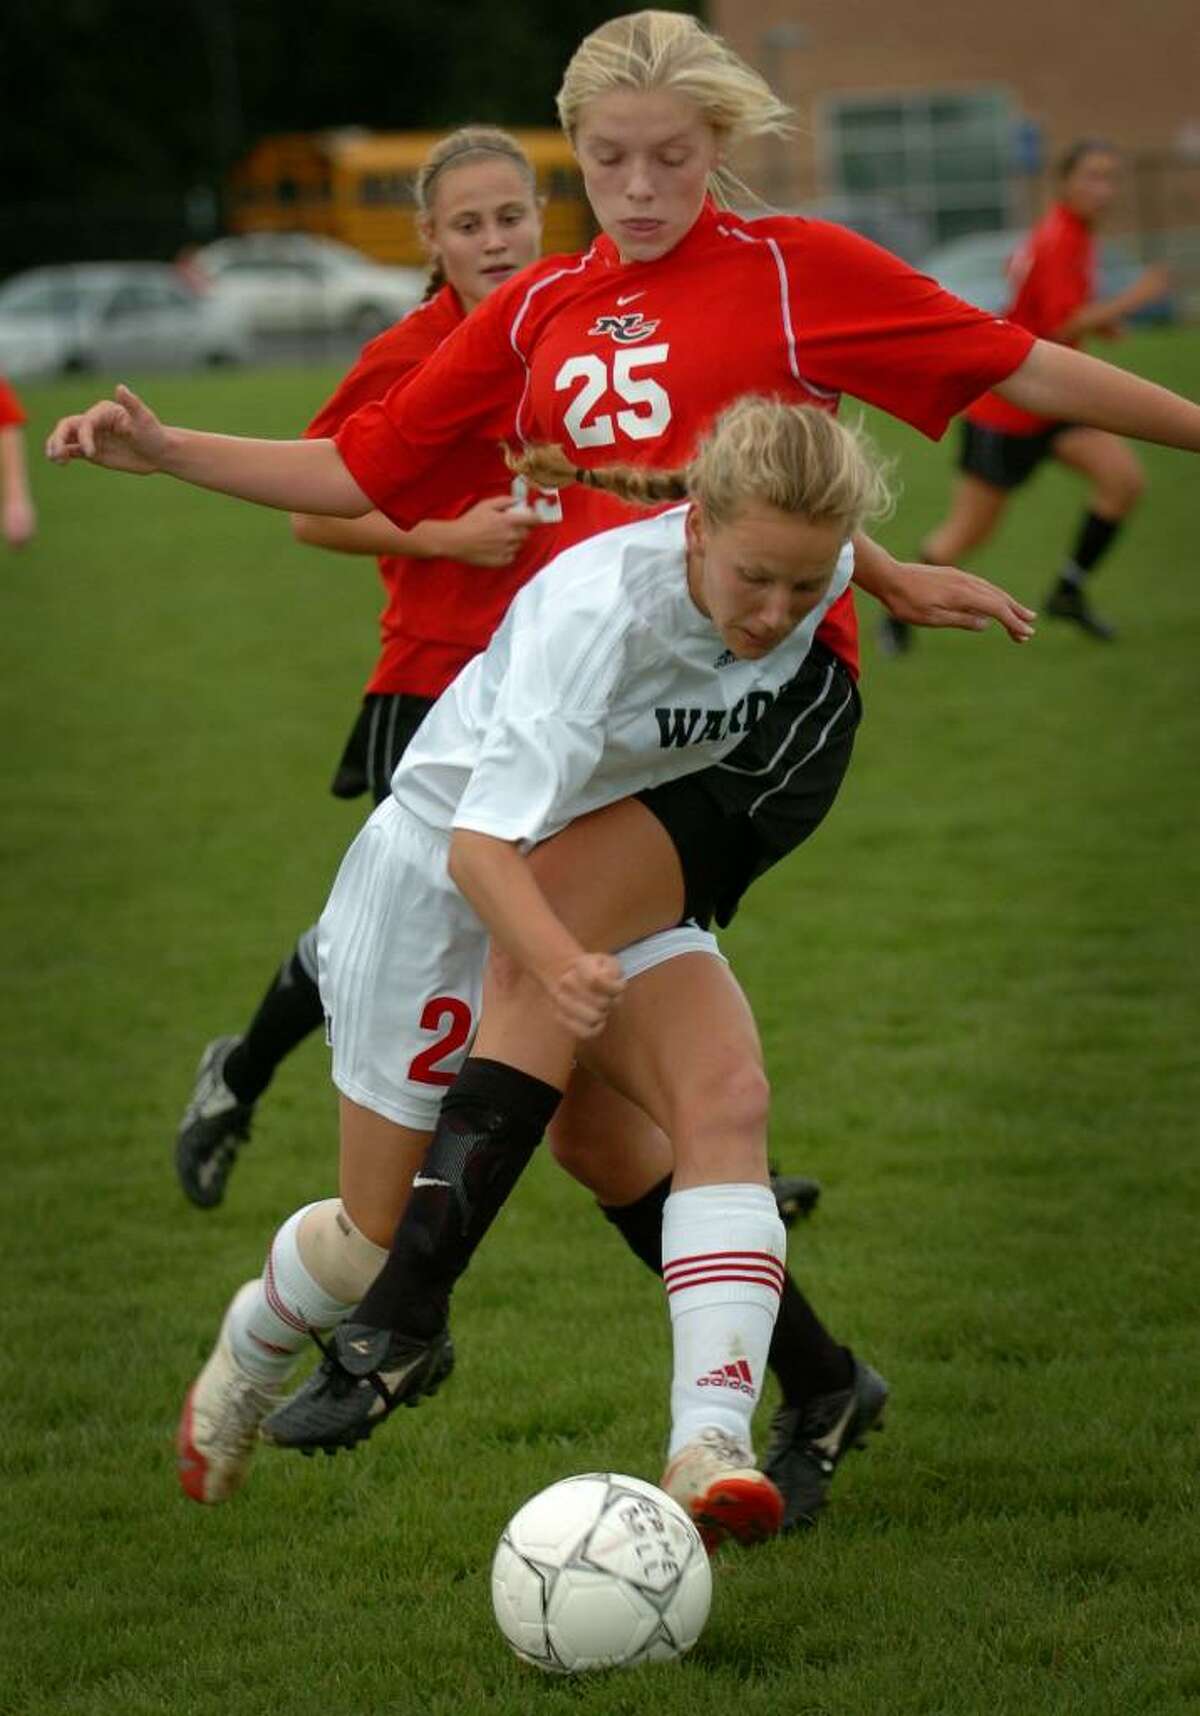 Fairfield Warde's Sarah Duffy locks up with New Canaan defender Kelly Armstrong during their FCIAC matchup at Warde High School in Fairfield, Conn. on Wednesday, September 30, 2009.